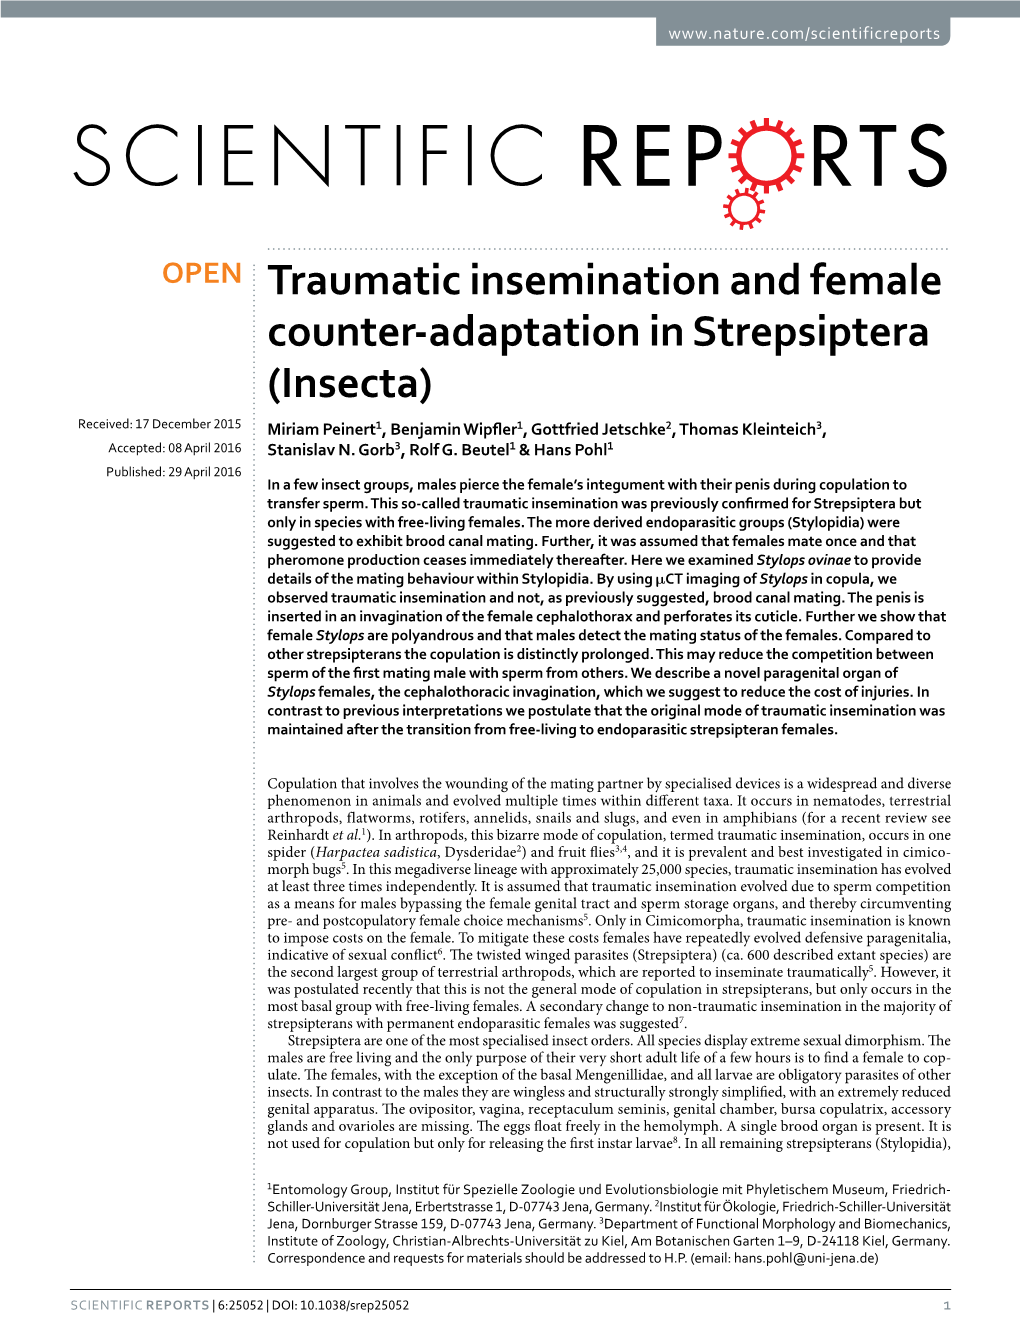 Traumatic Insemination and Female Counter-Adaptation in Strepsiptera